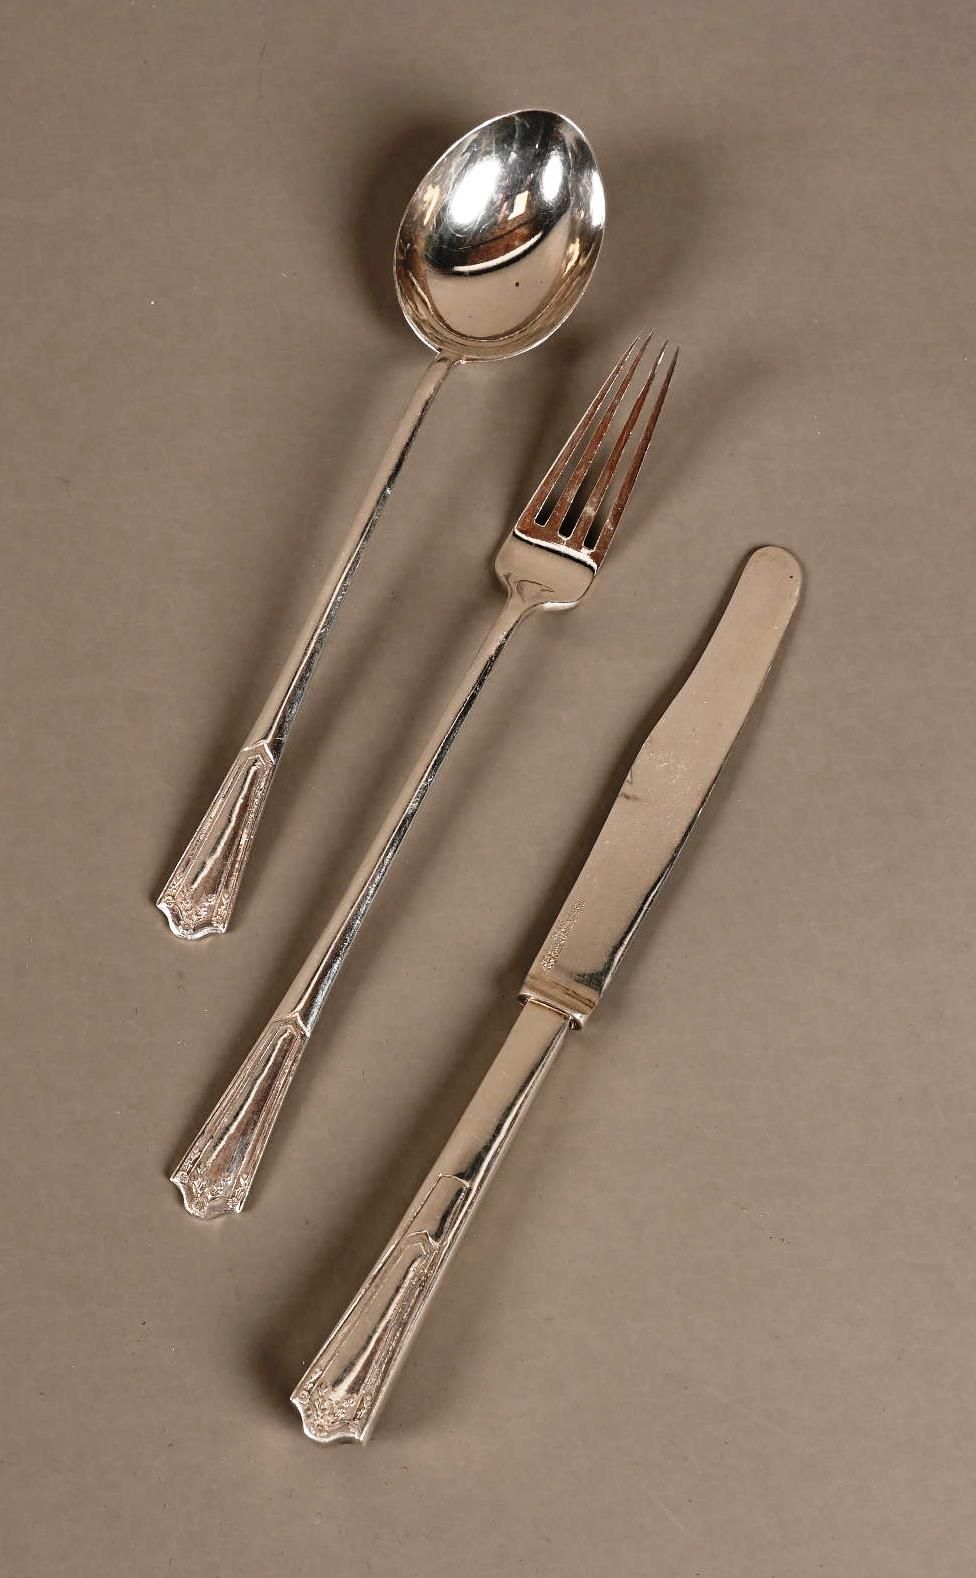 Suite de trois couverts en argent CHINA.

Suite of three silver cutlery. Chinese&hellip;